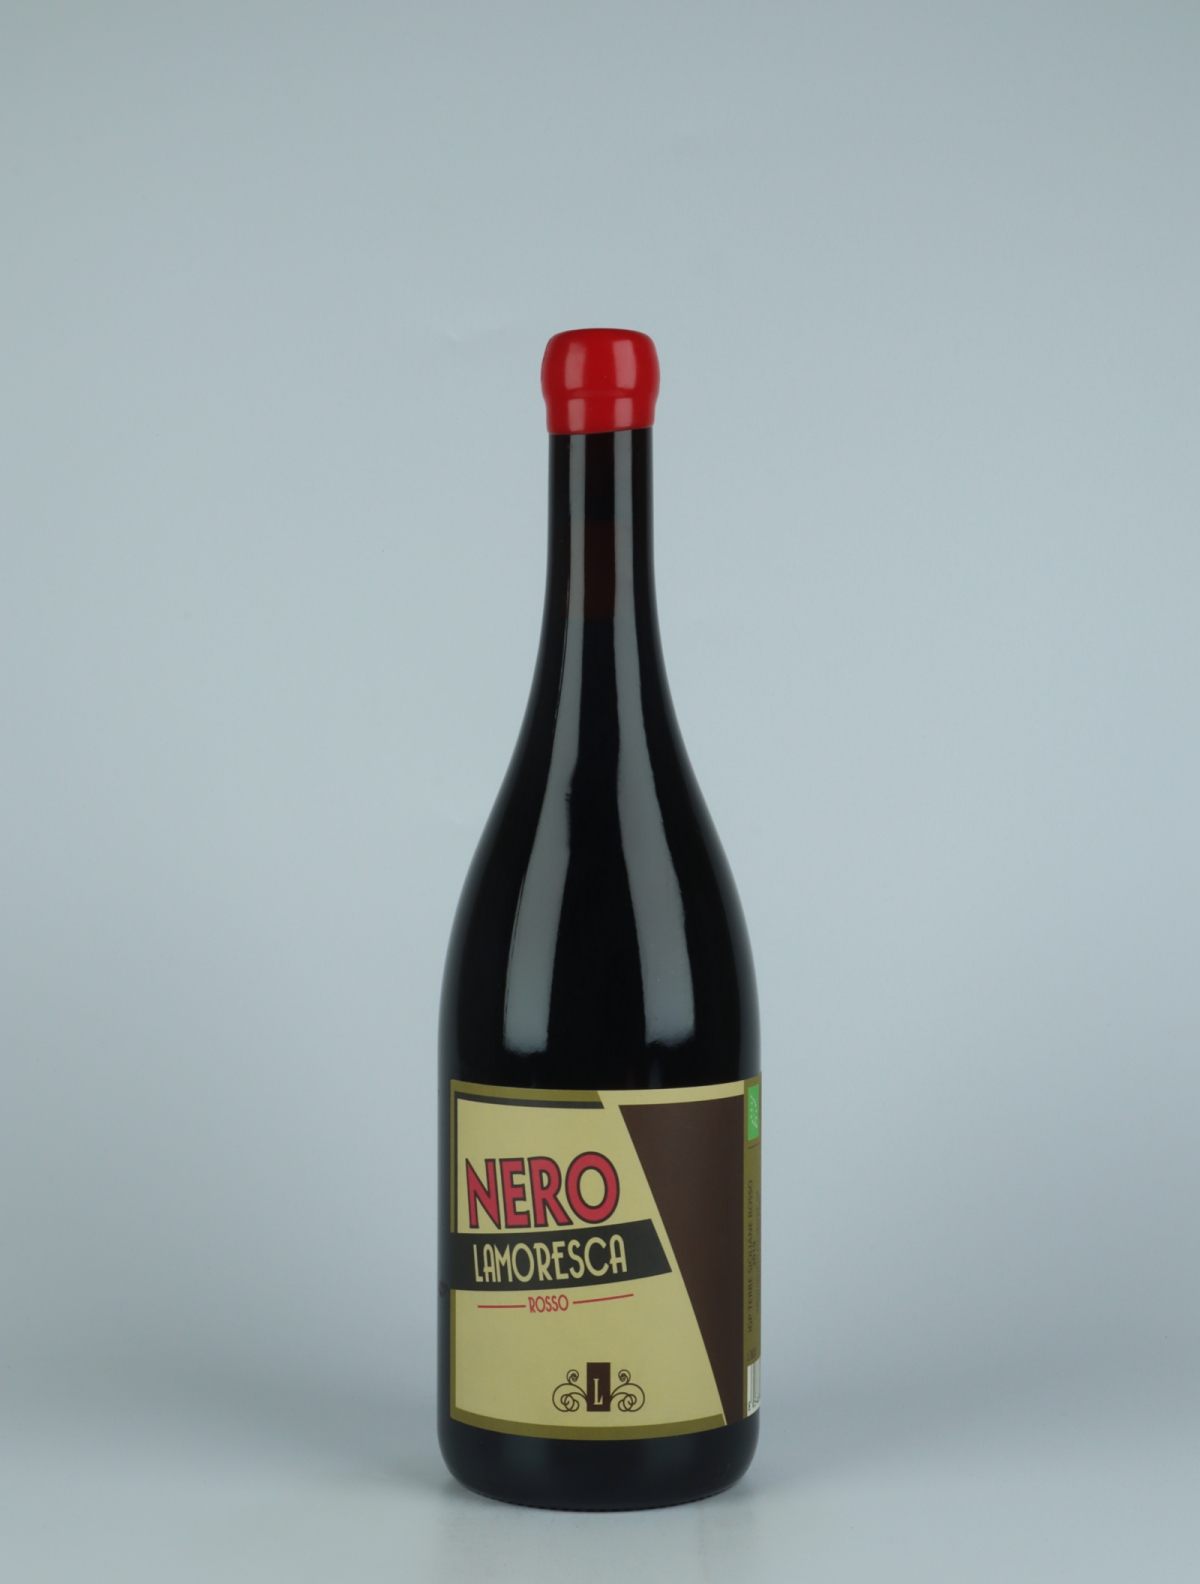 A bottle 2019 Nero Red wine from Lamoresca, Sicily in Italy